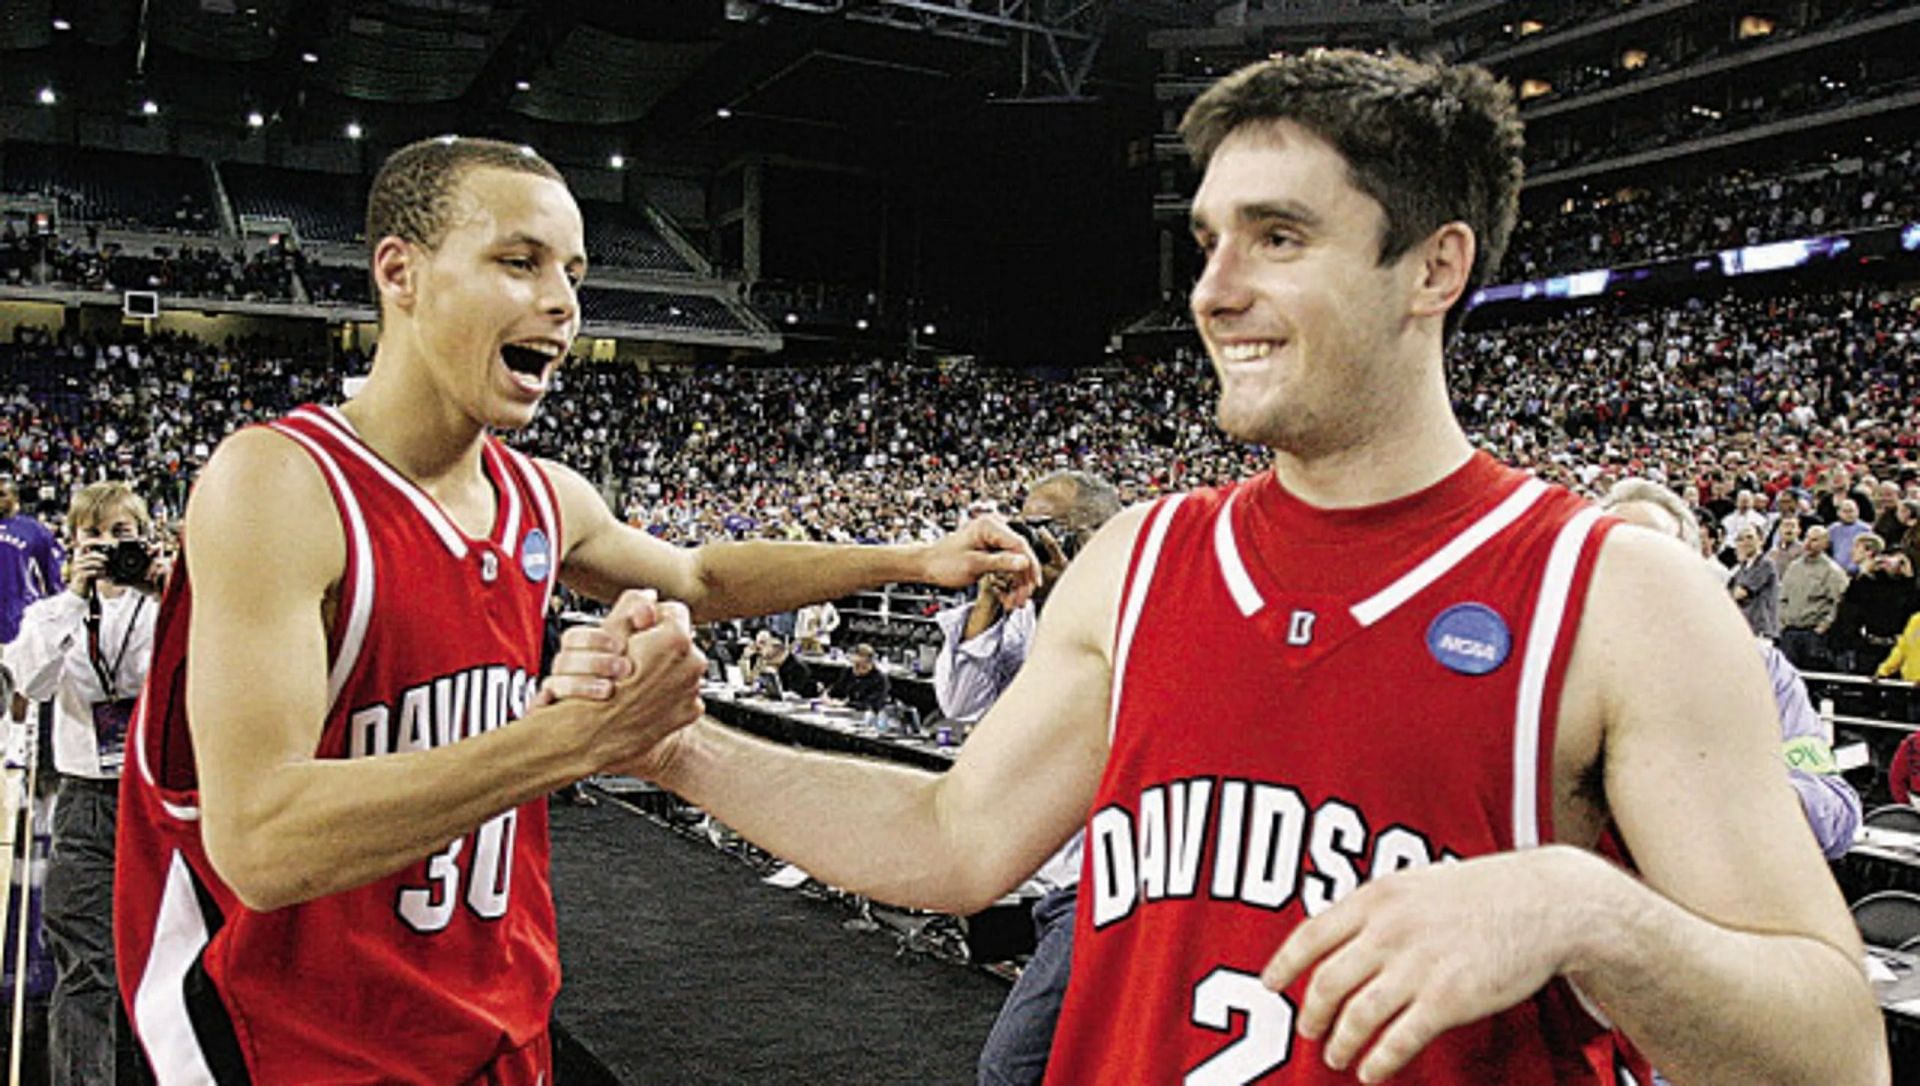 Davidson&rsquo;s Stephen Curry celebrates with teammate Jason Richards after beating Wisconsin by 17 to reach the Elite Eight (AP Photo/Michael Conroy) 